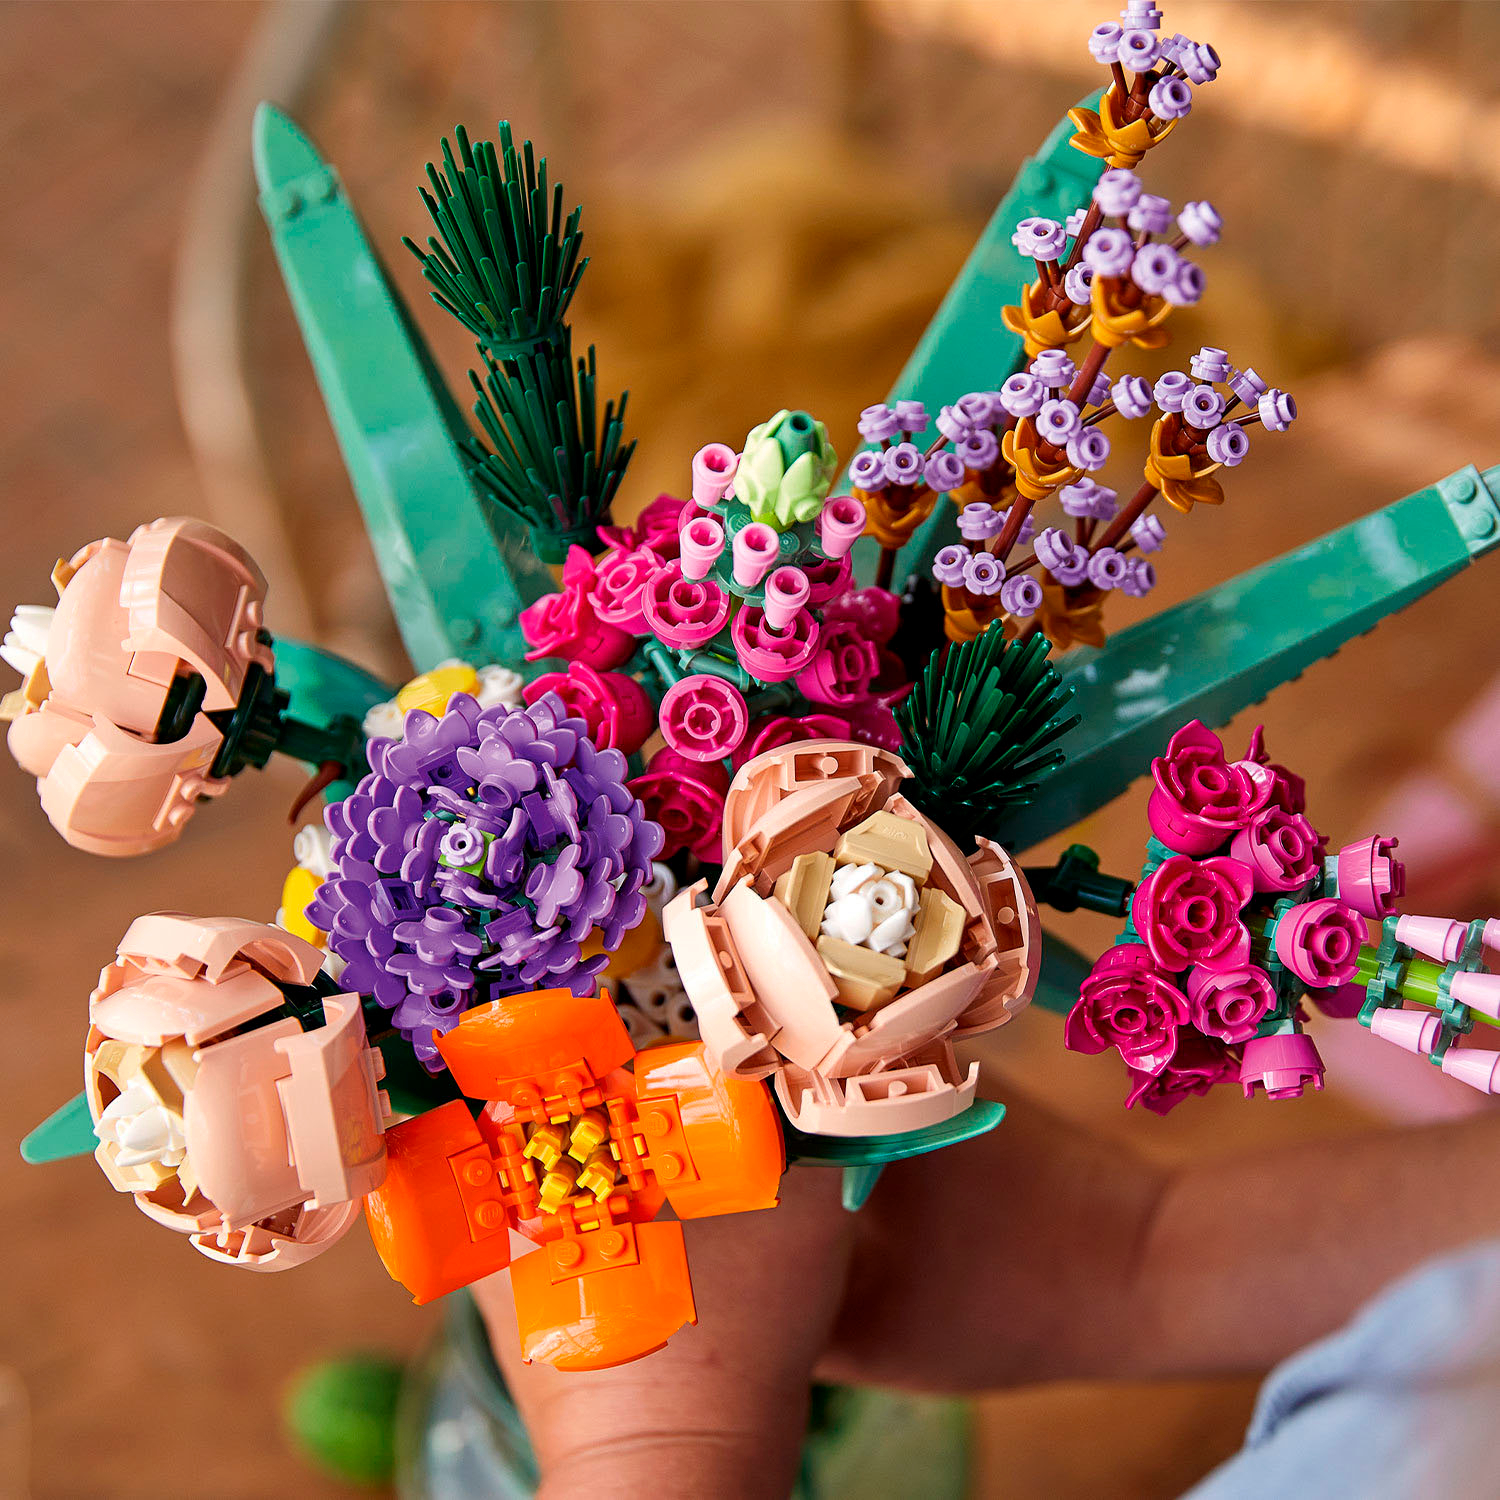 Buy the Lego Flower Bouquet Assembly Kit